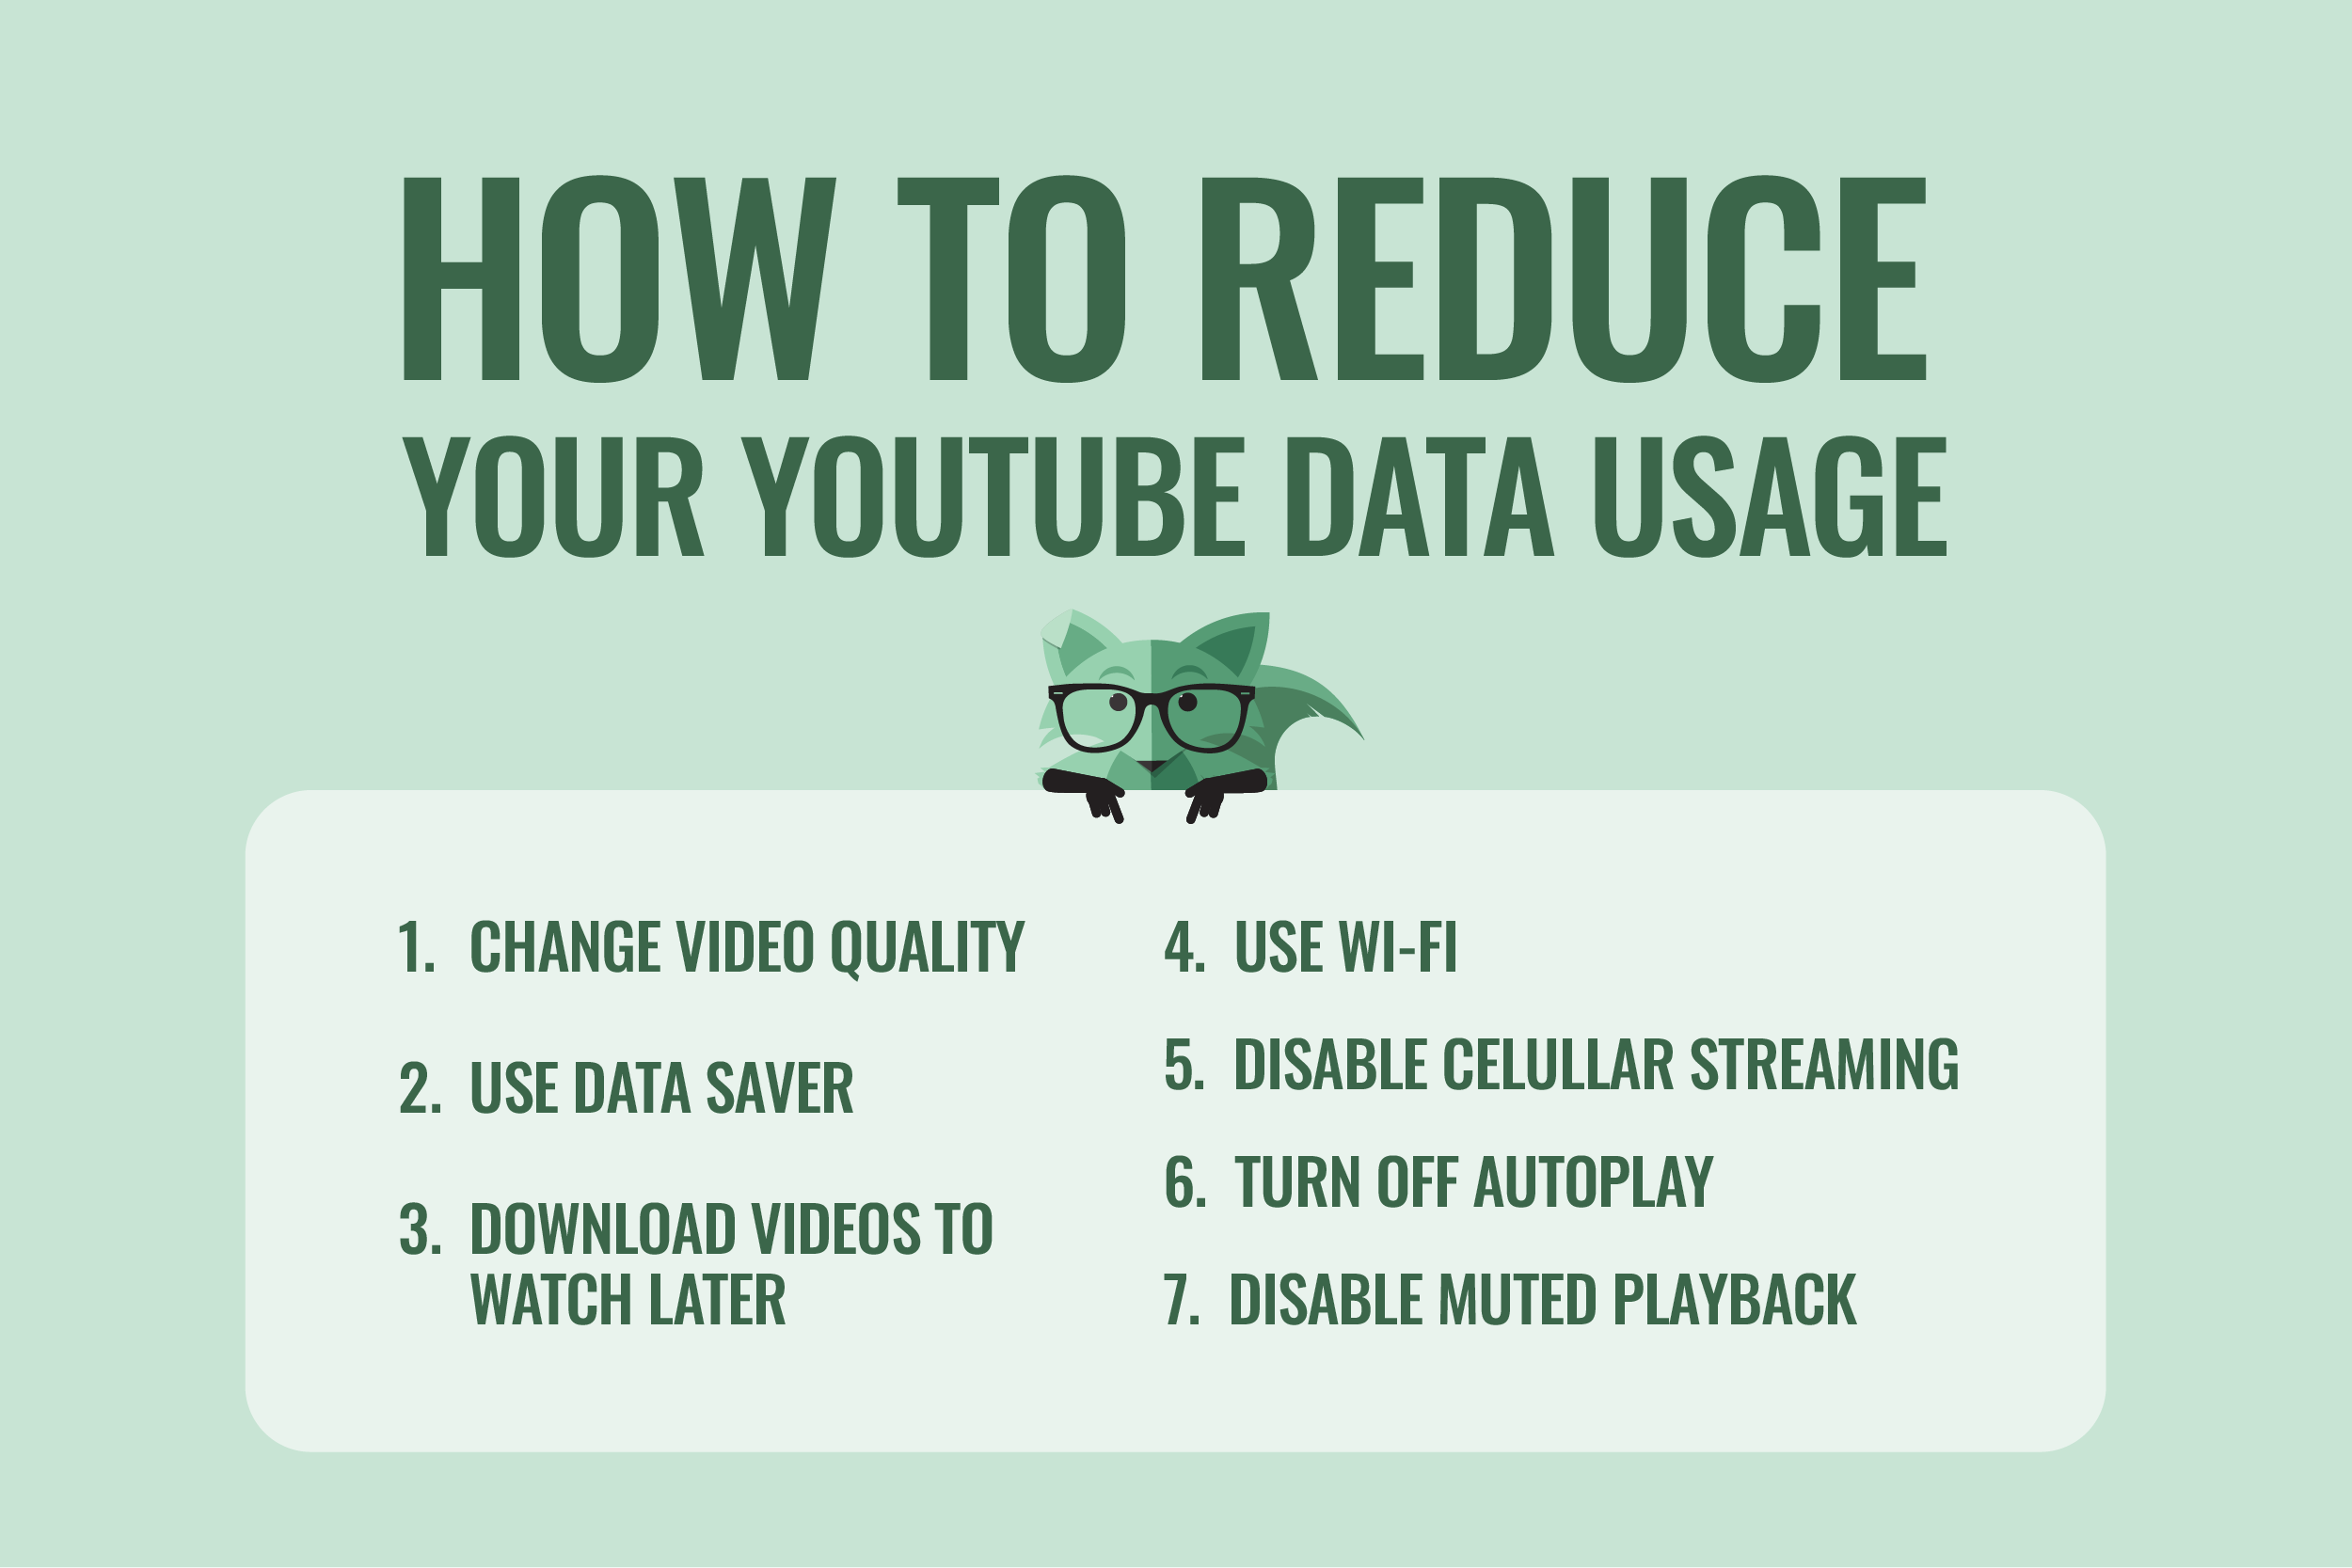 List of ways to reduce YouTube data usage